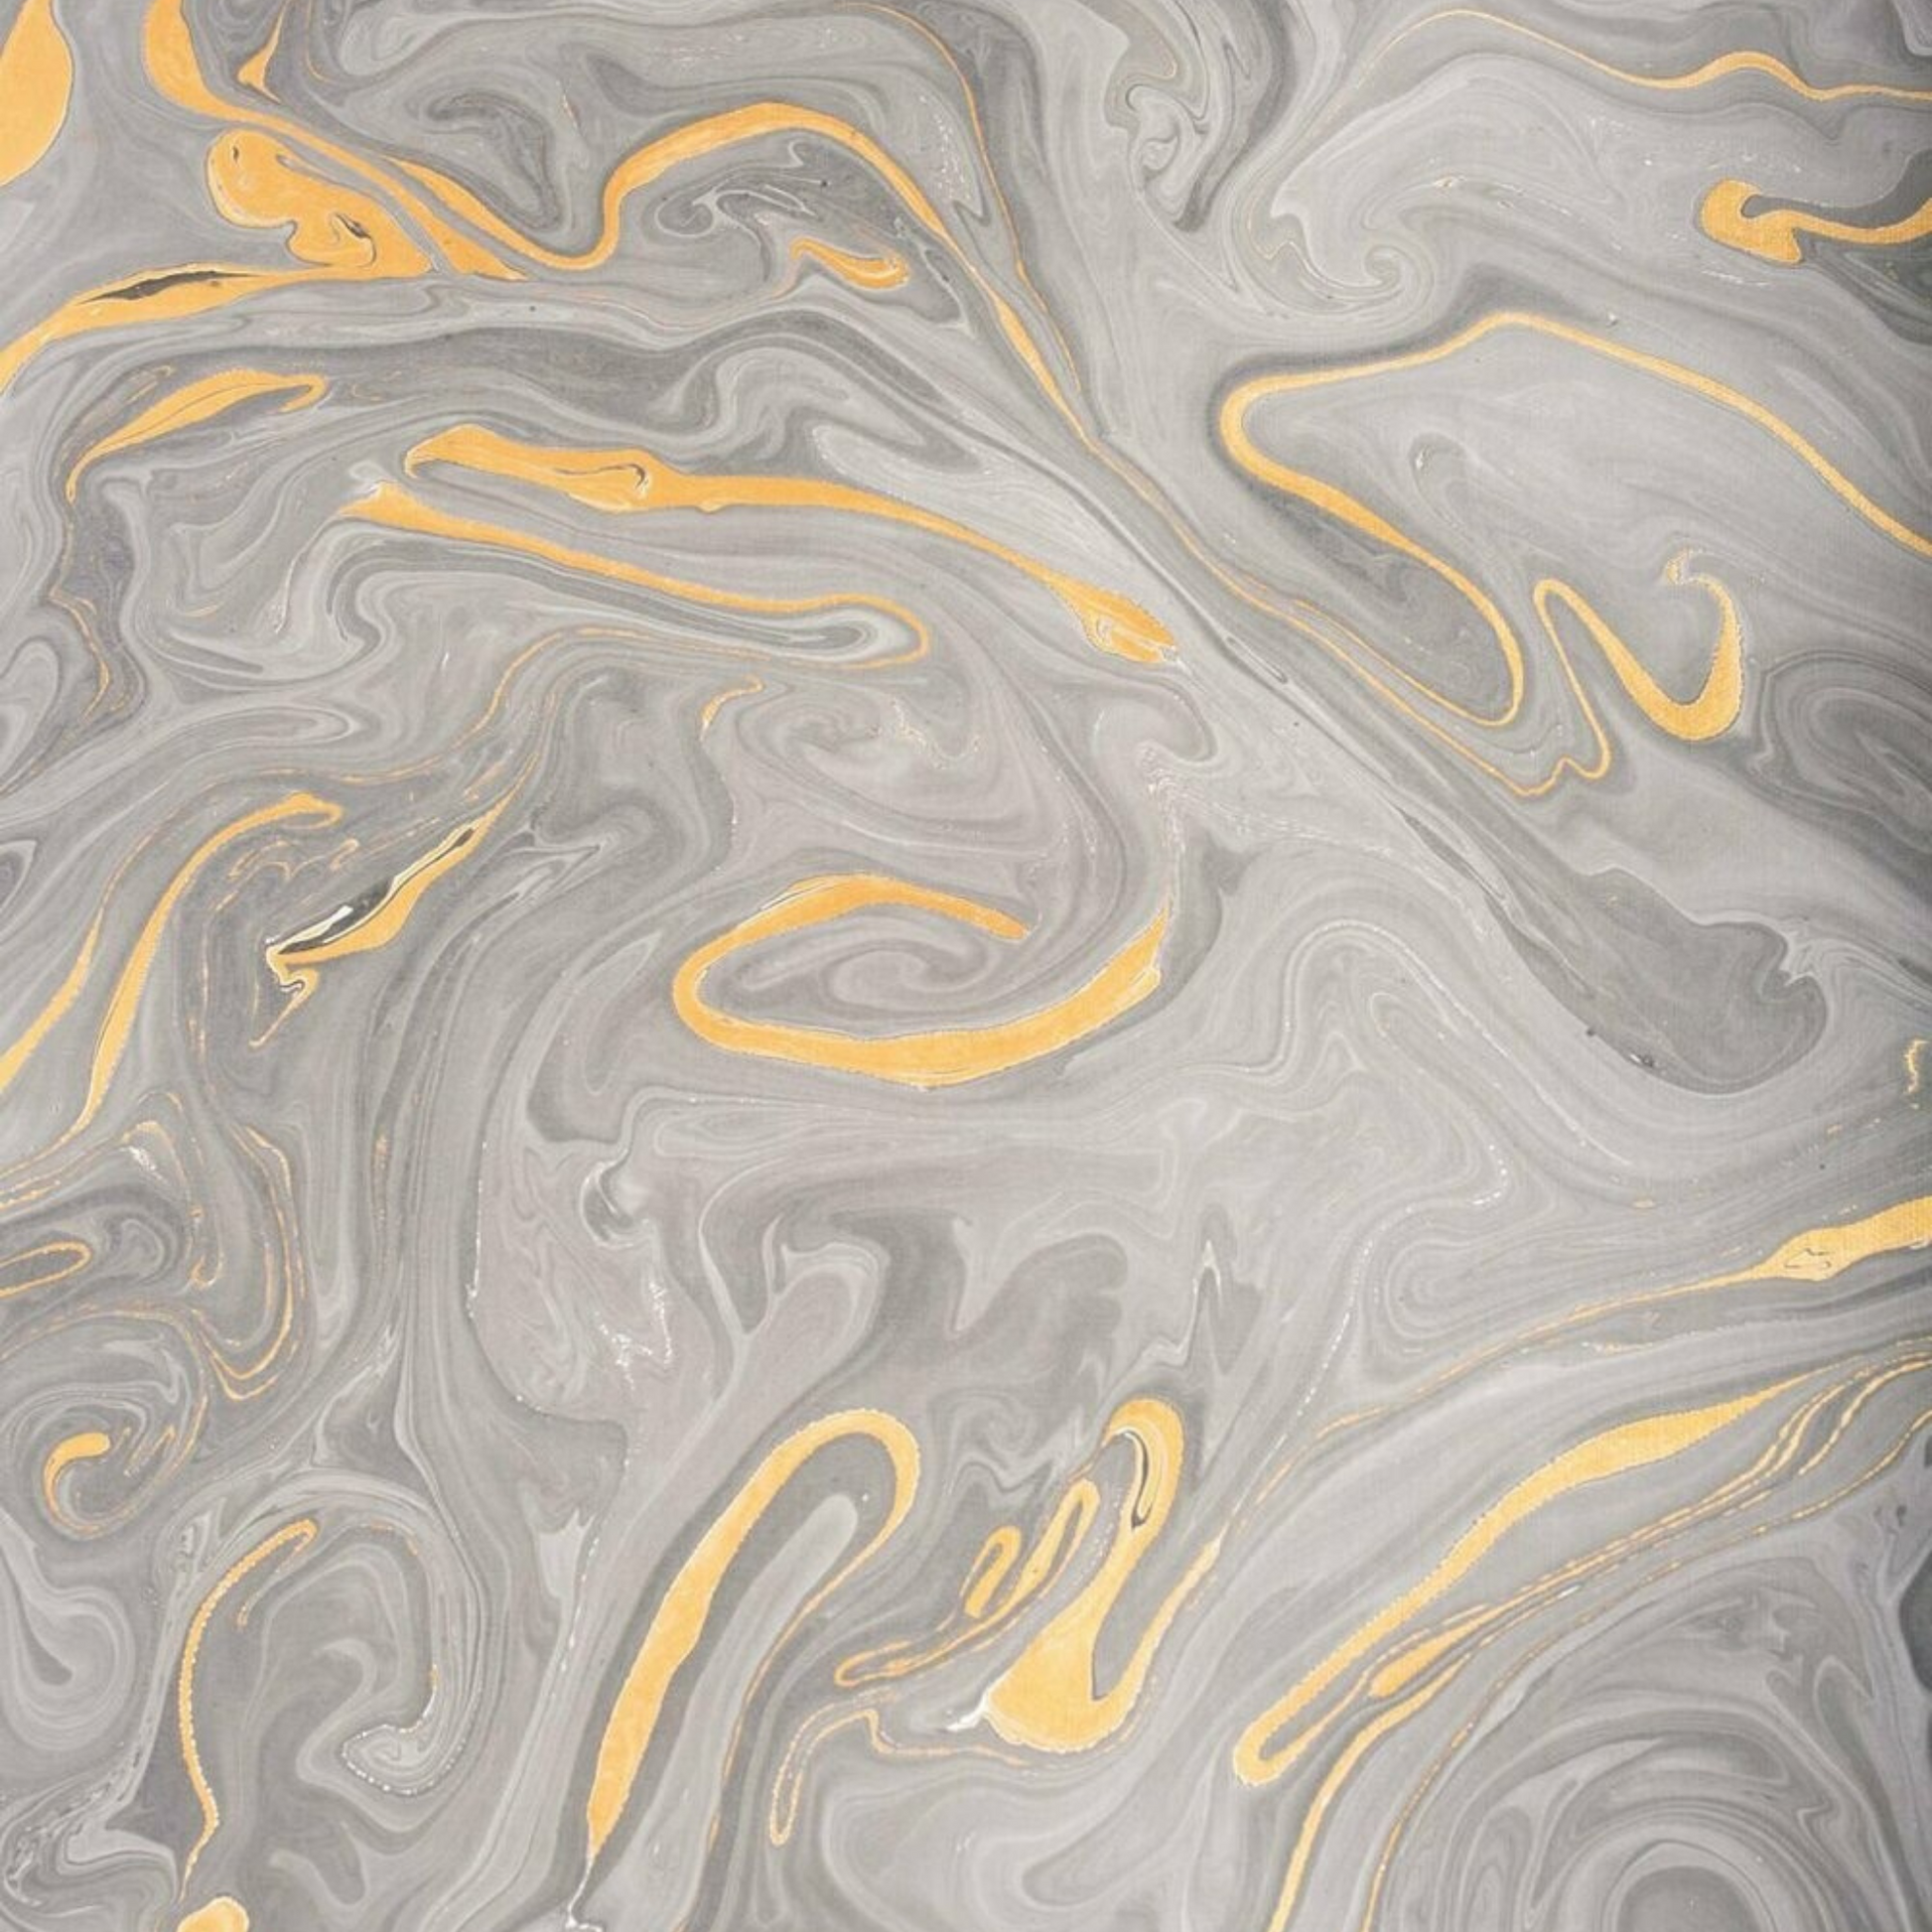 A beautiful and unique hand made marbled gift wrap